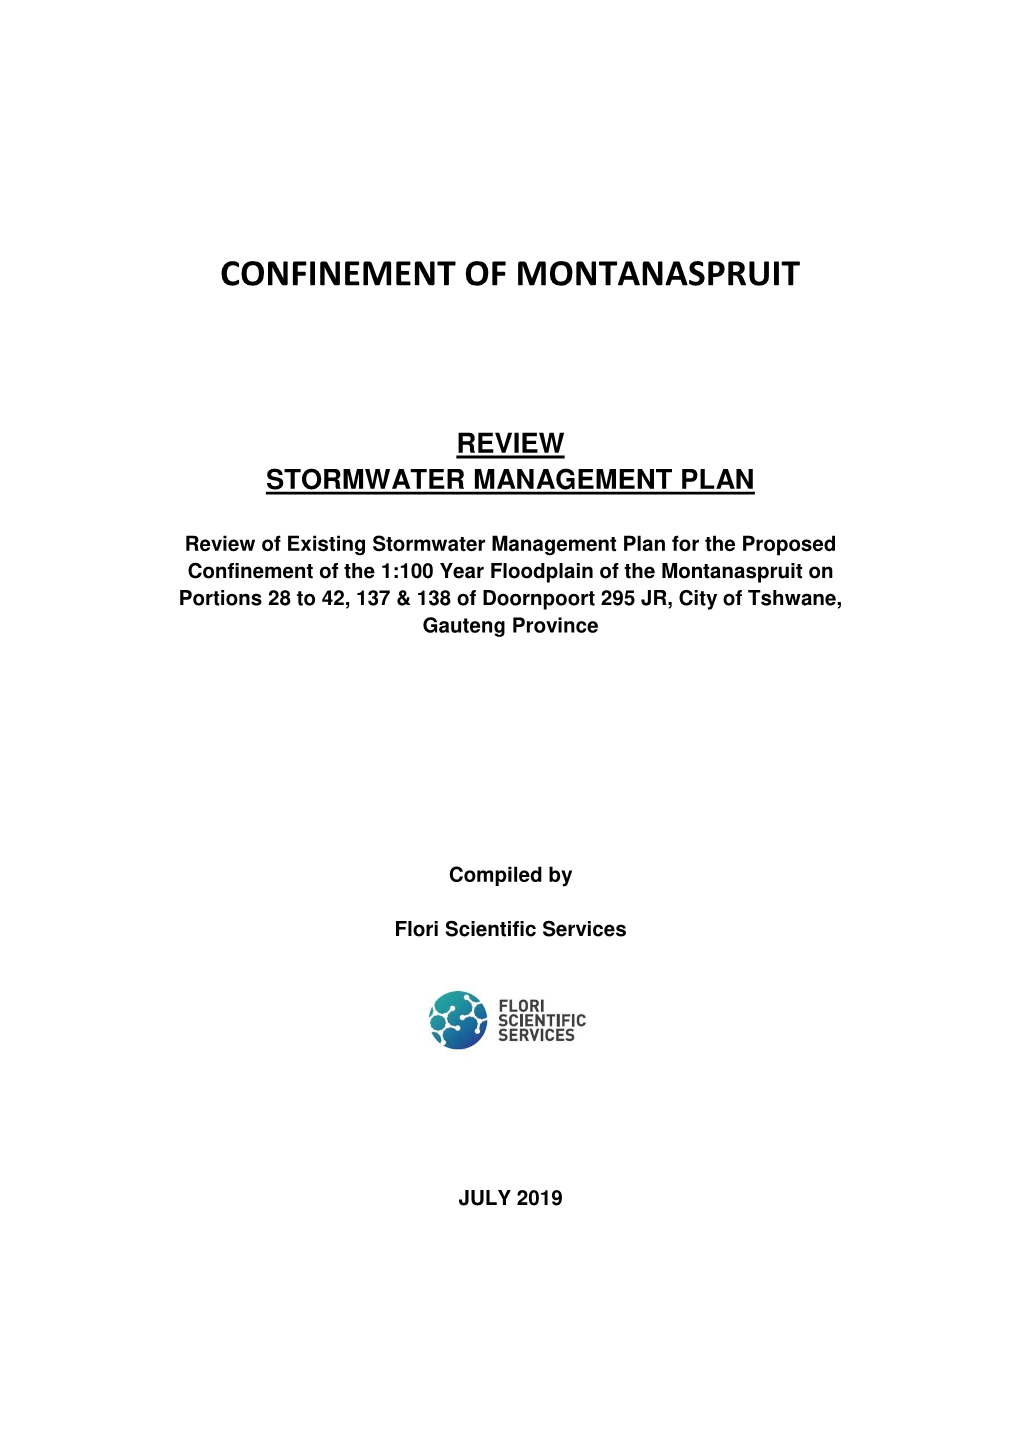 Review Stormwater Management Plan